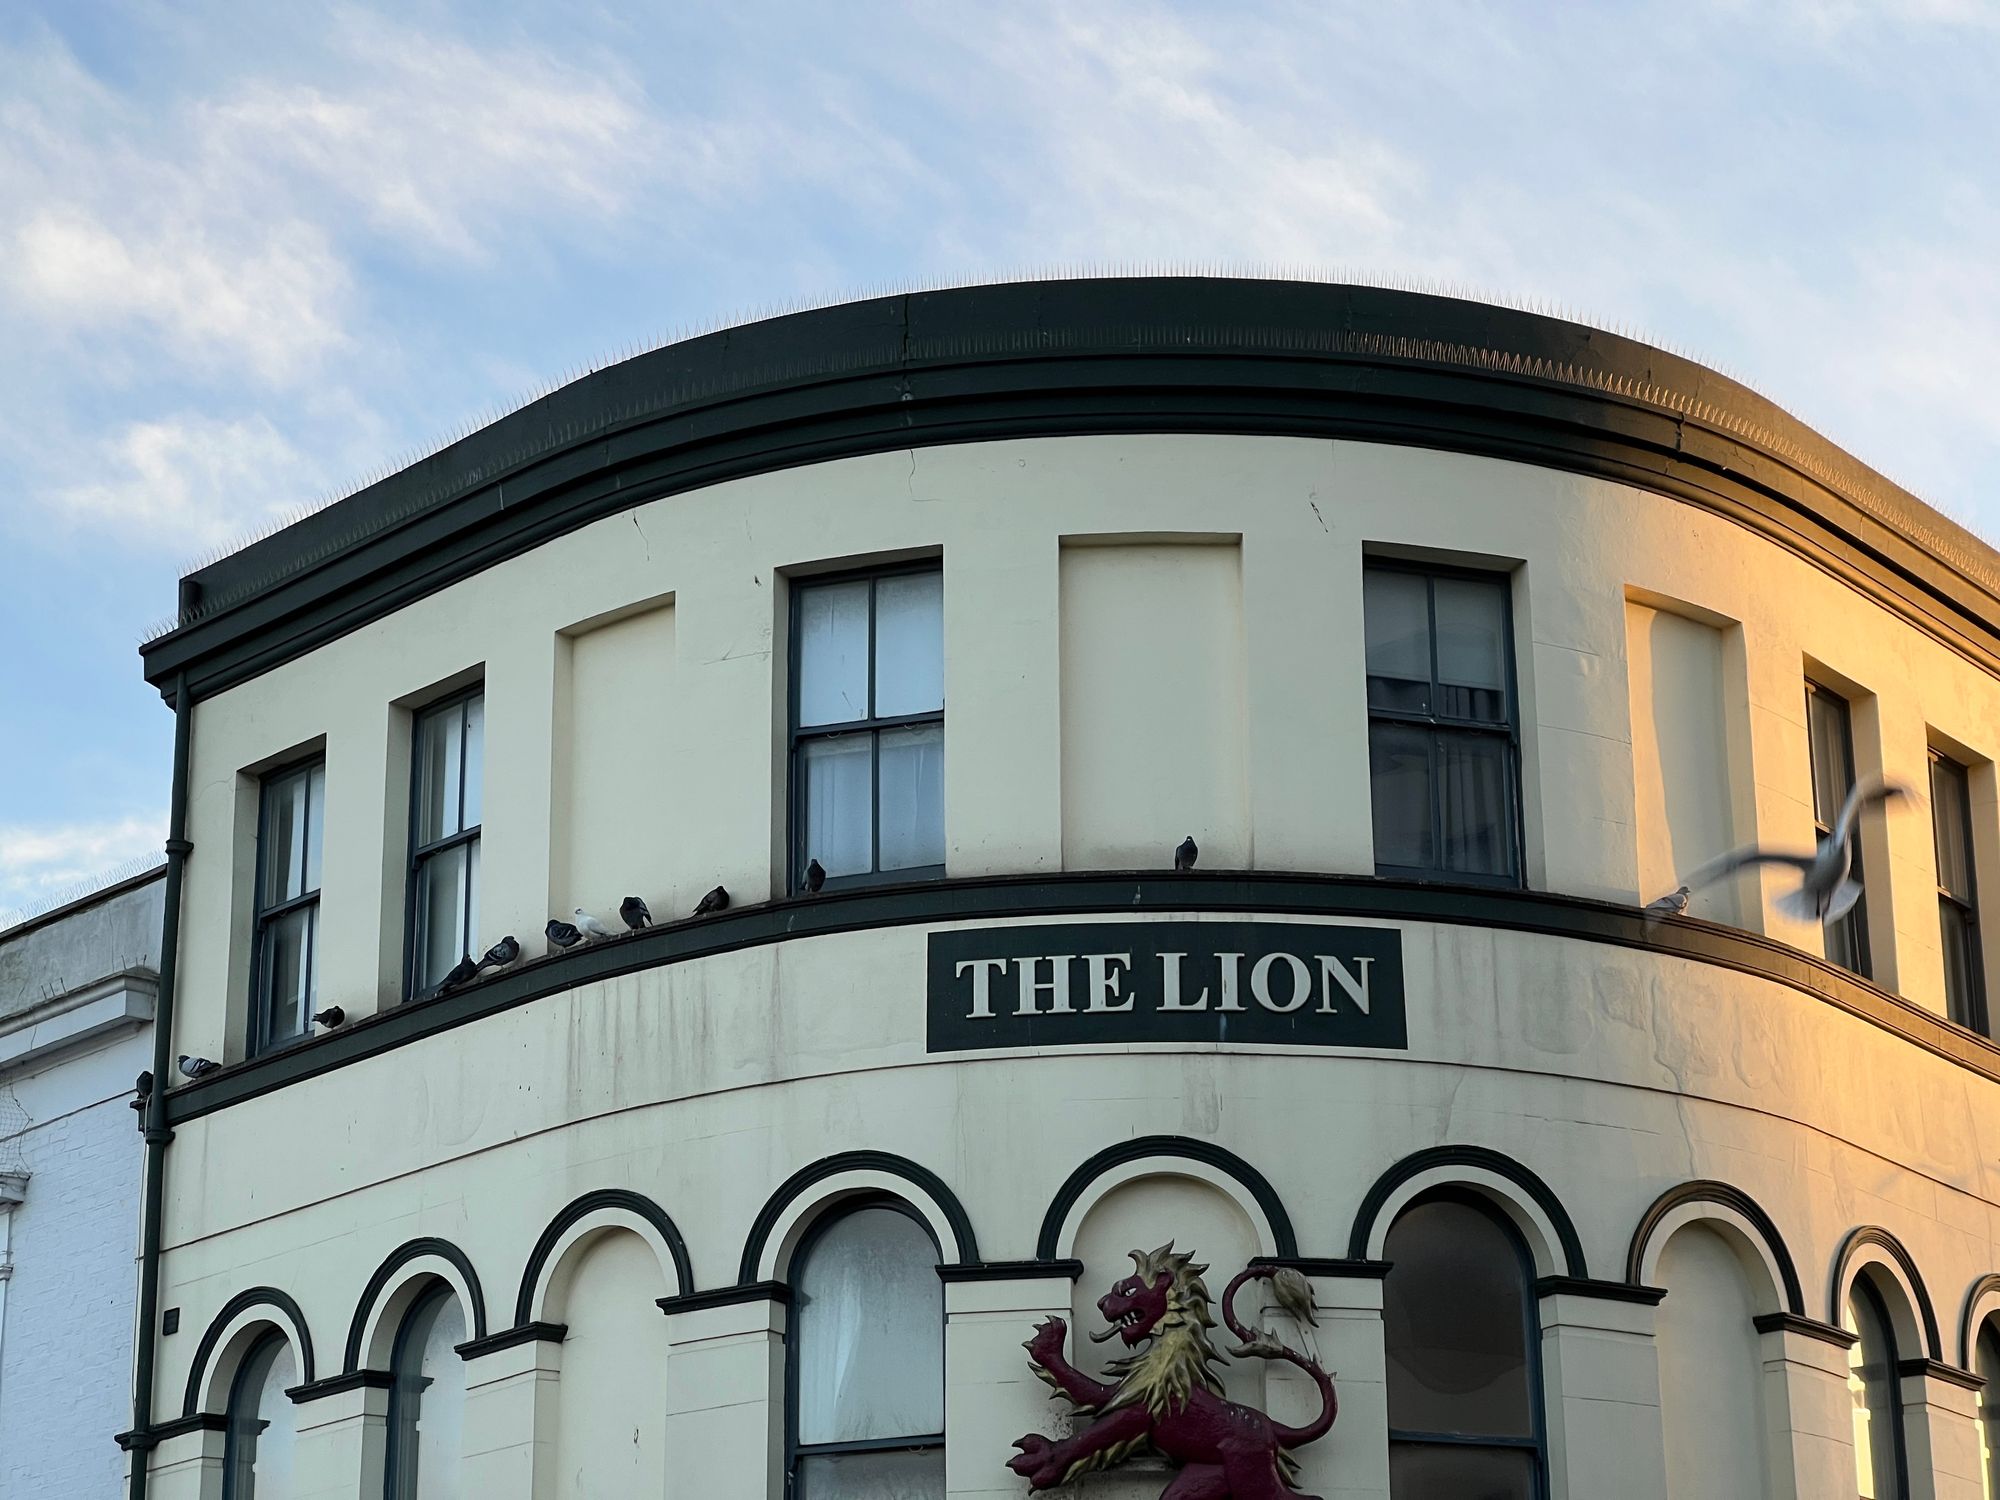 A curved corner building—a pub named THE LION, with light yellow rendering and black arches and eaves, with a lion sculpture above the door—stands at sunset with a warm glow to the right. Pigeons rest on the windowsills. A seagull flies in front.